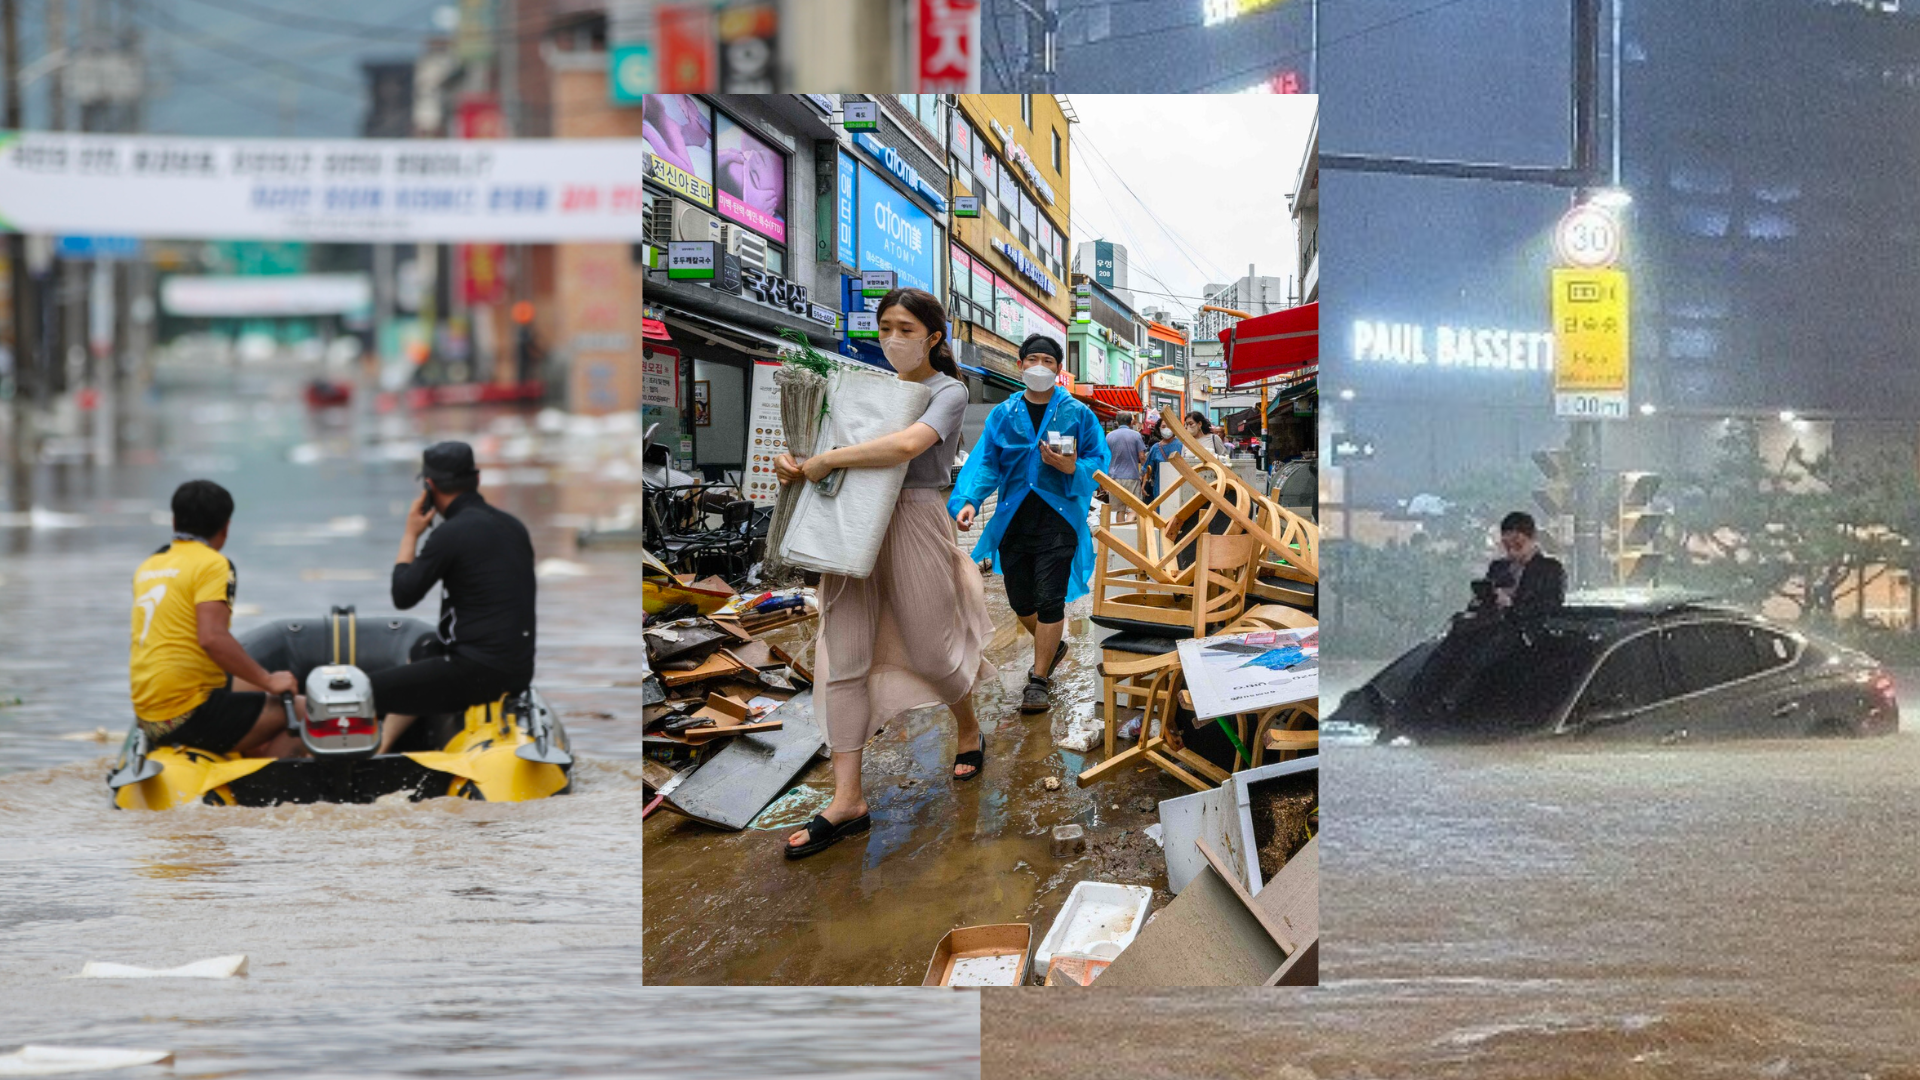 South Korea Hit By Its Worst Rain Storm In 80 Years!